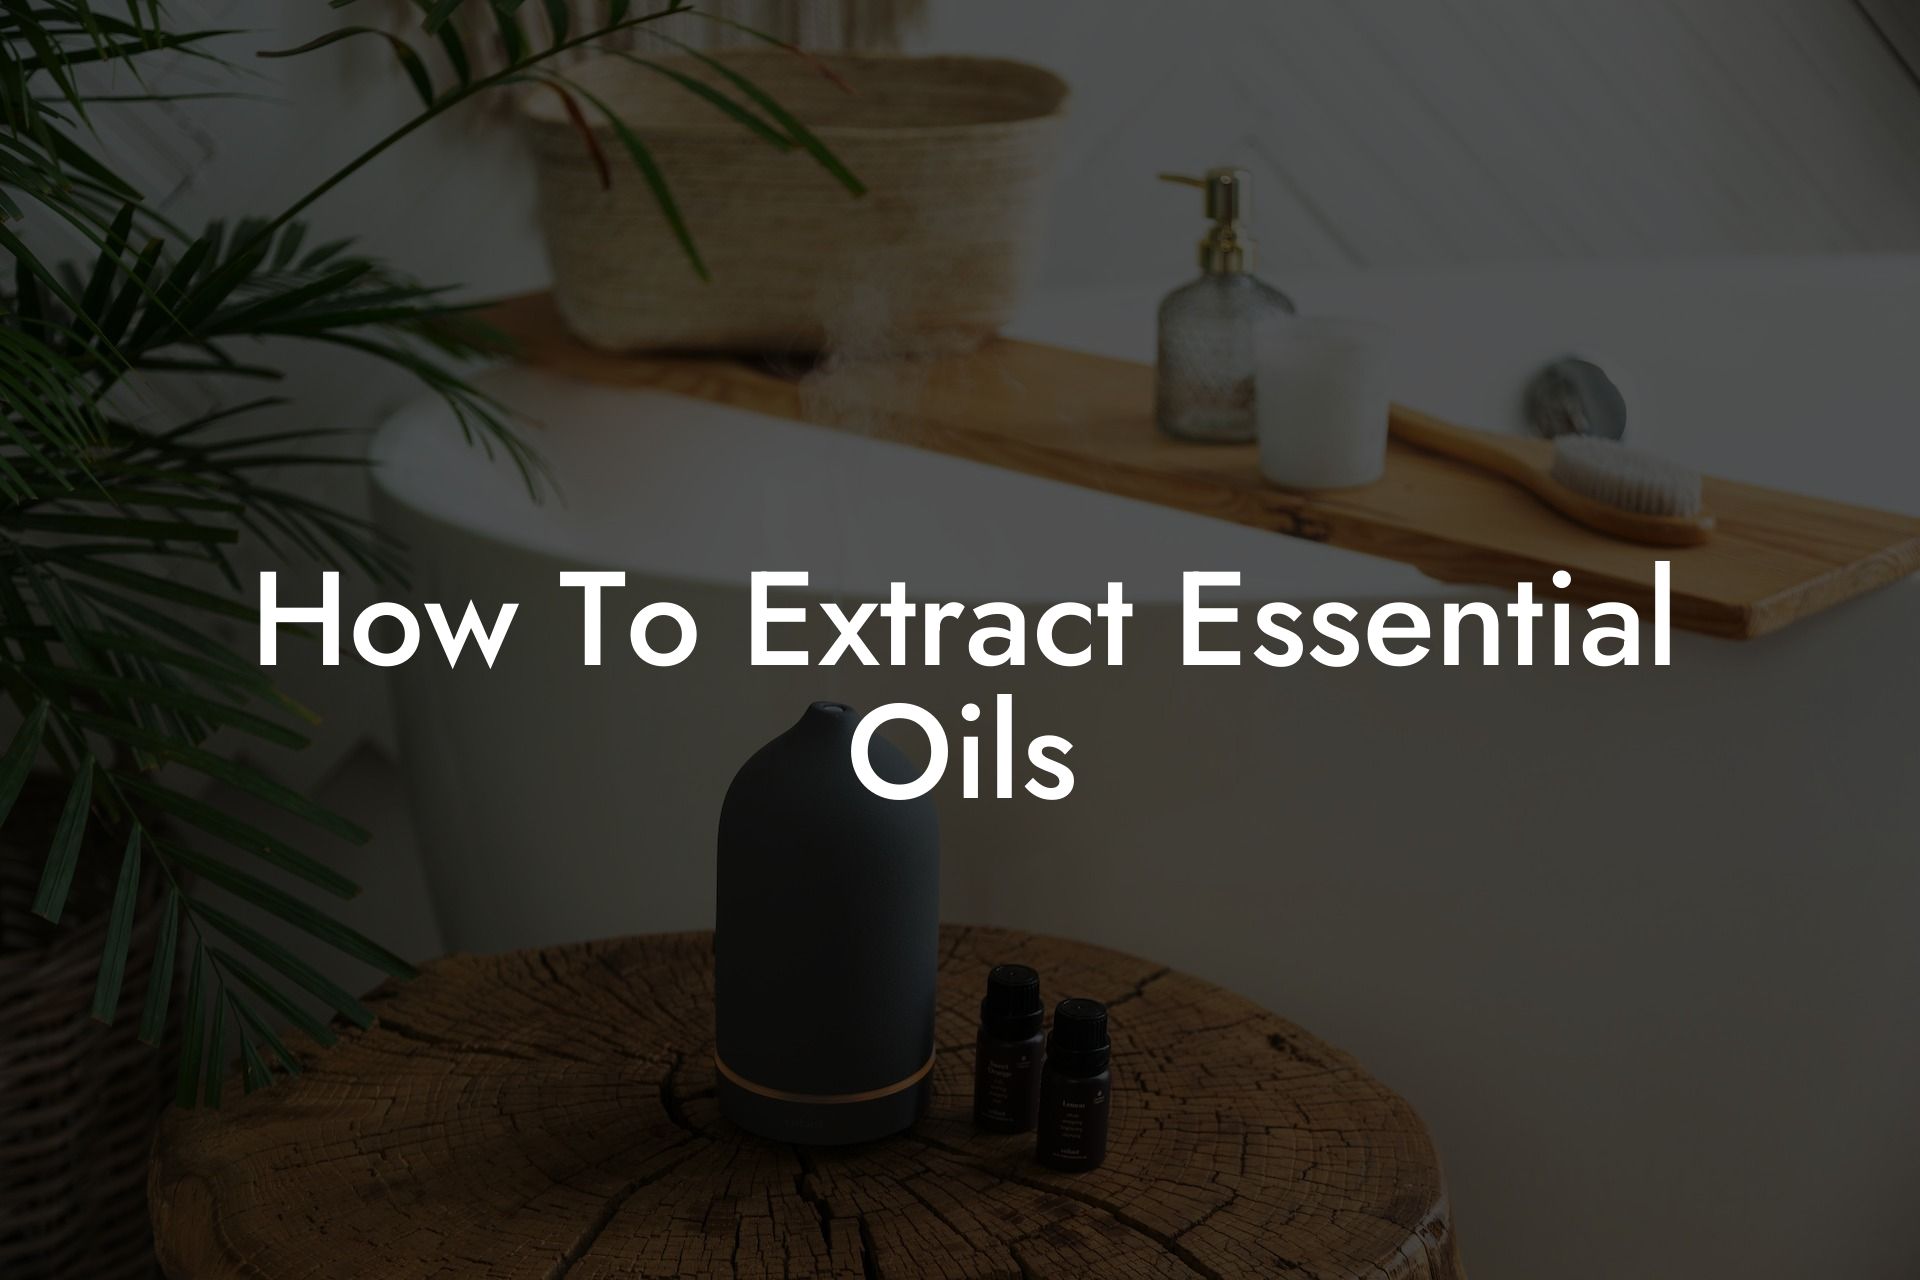 How To Extract Essential Oils